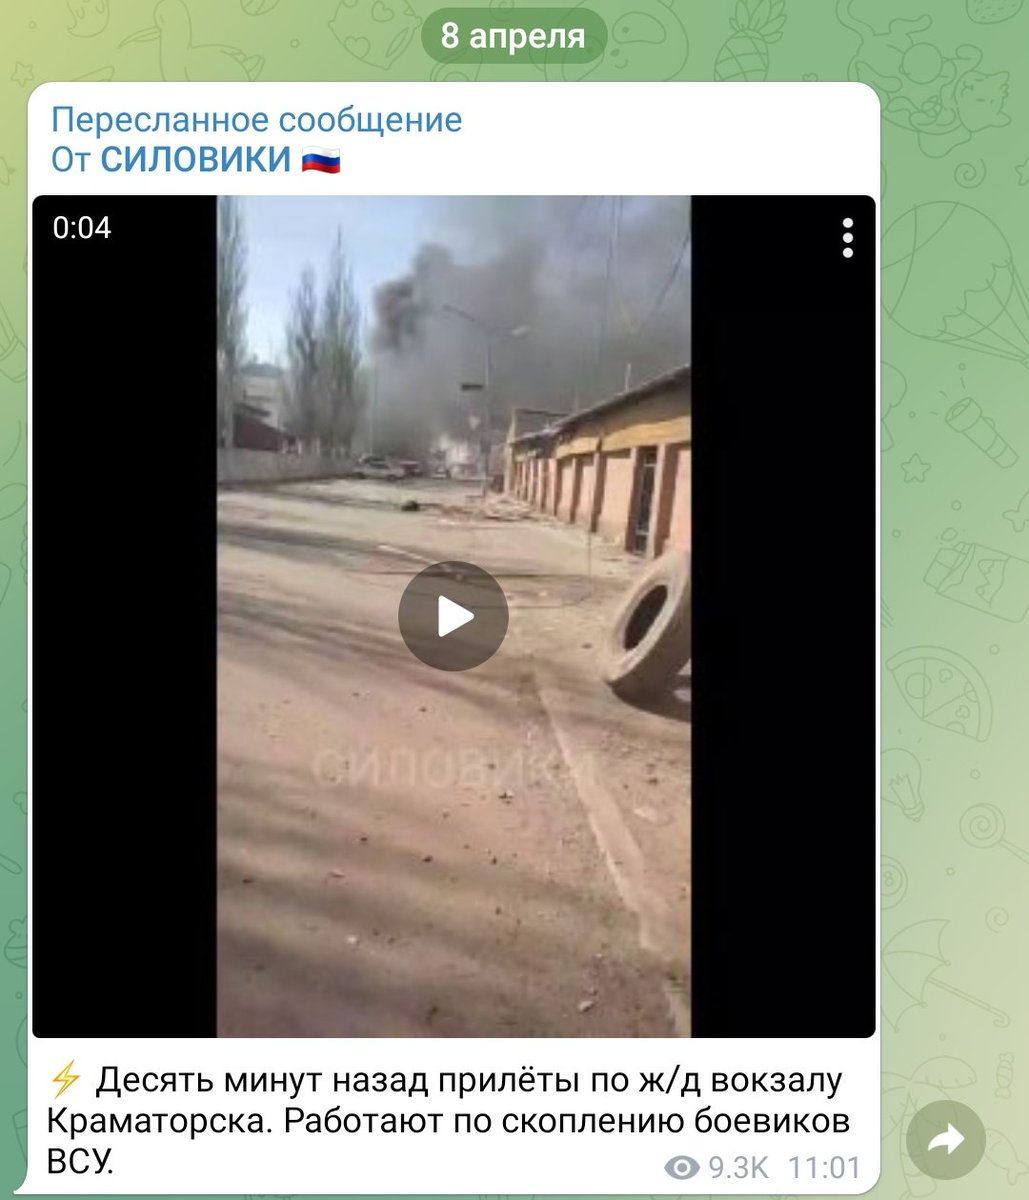 Russian Telegram channel claimed that “missile attack on Kramatorsk railway station targeted gathering of troops”